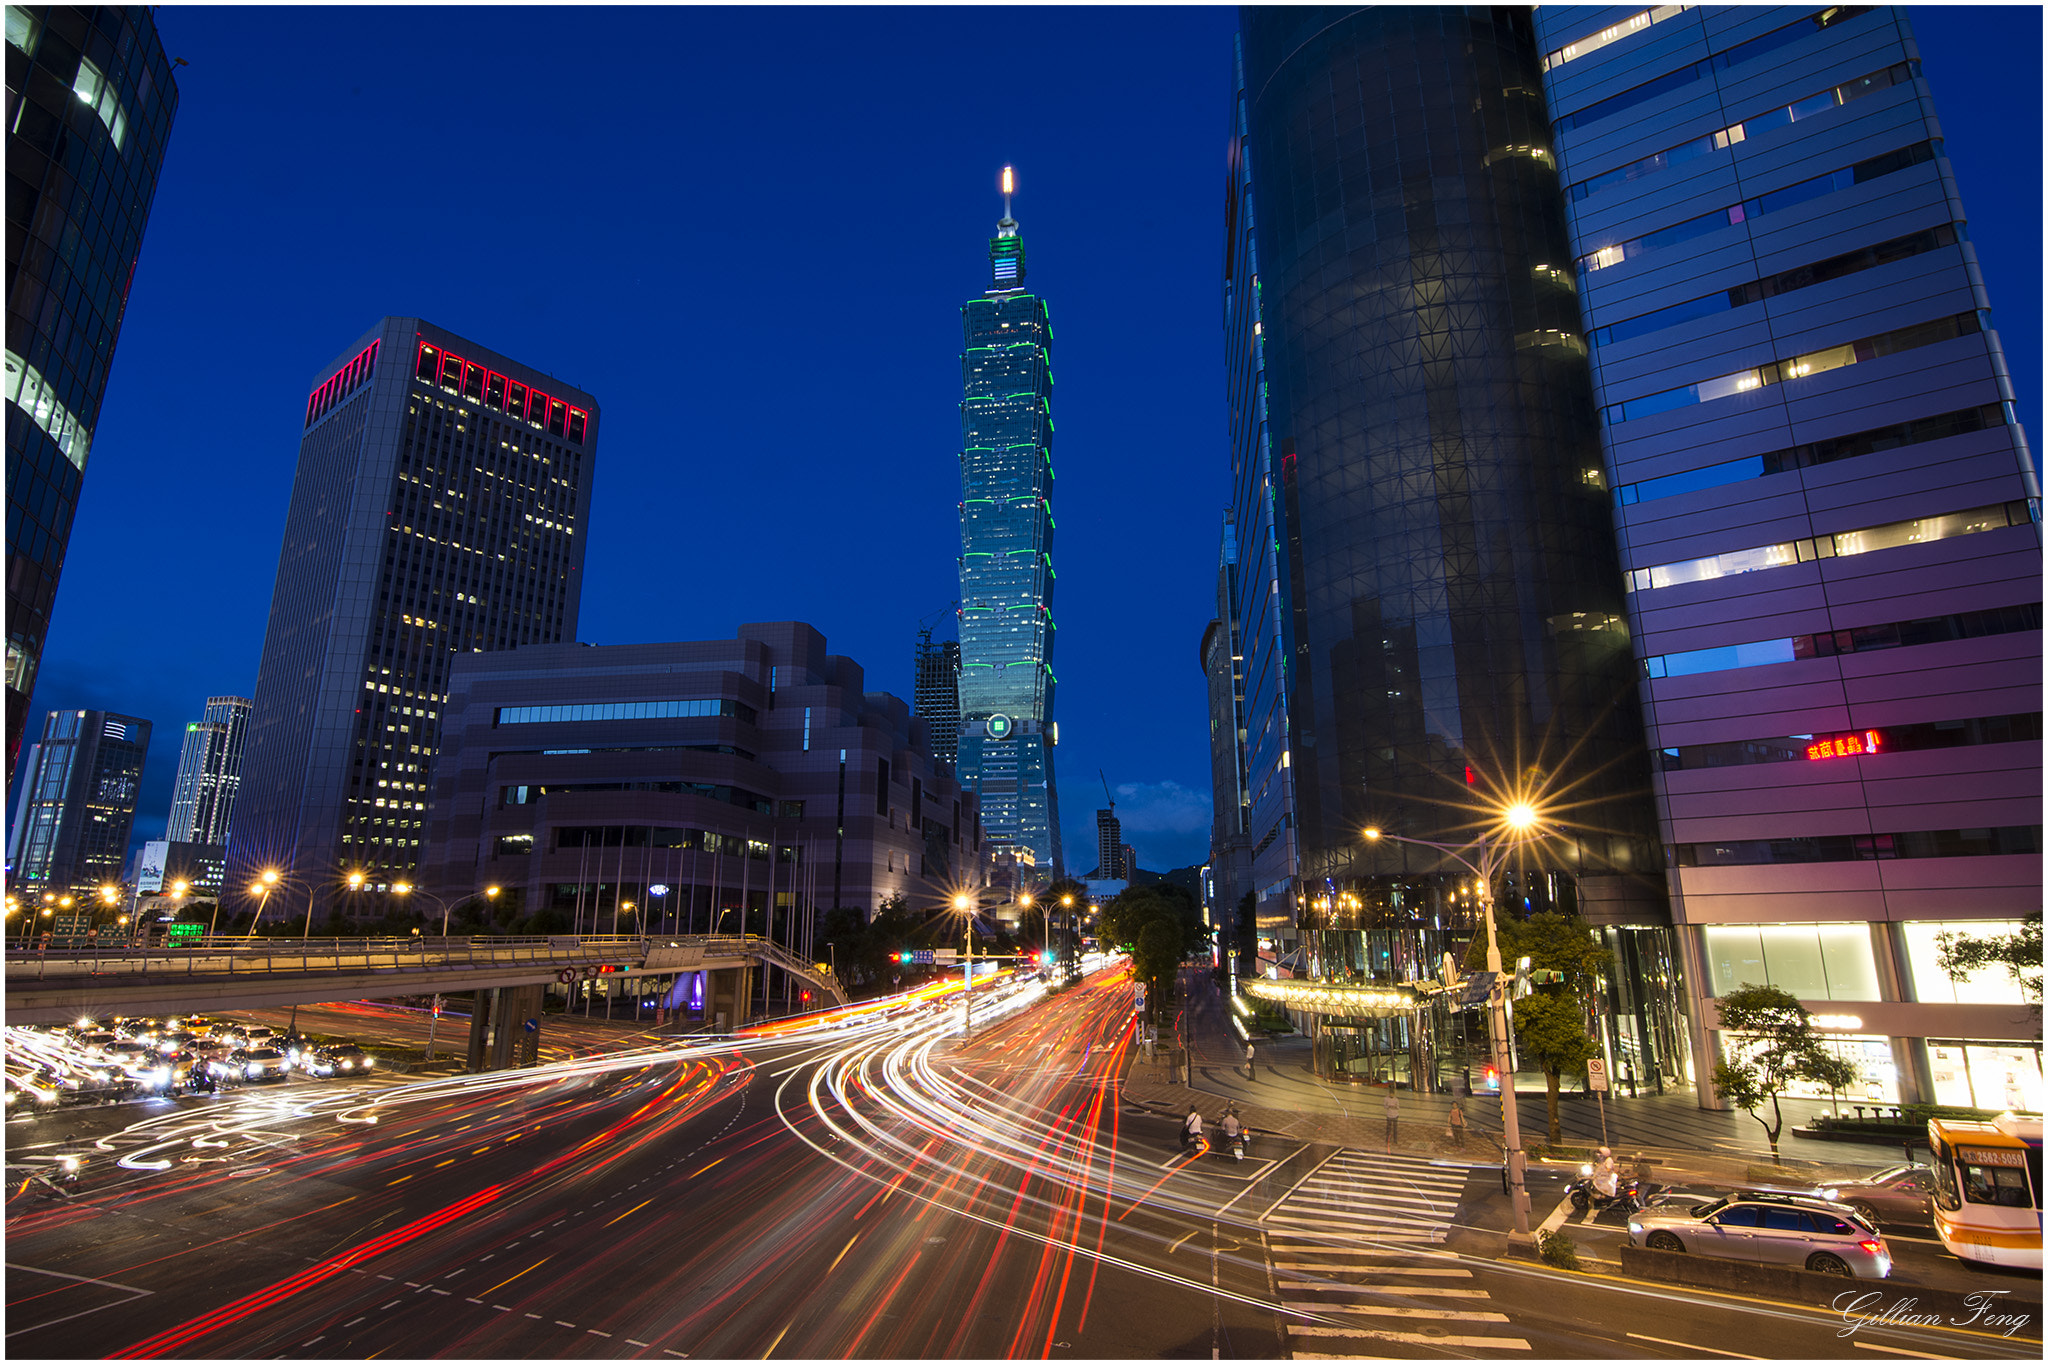 Tokina AT-X 11-20 F2.8 PRO DX (AF 11-20mm f/2.8) sample photo. The blue hour of taipei 101 photography